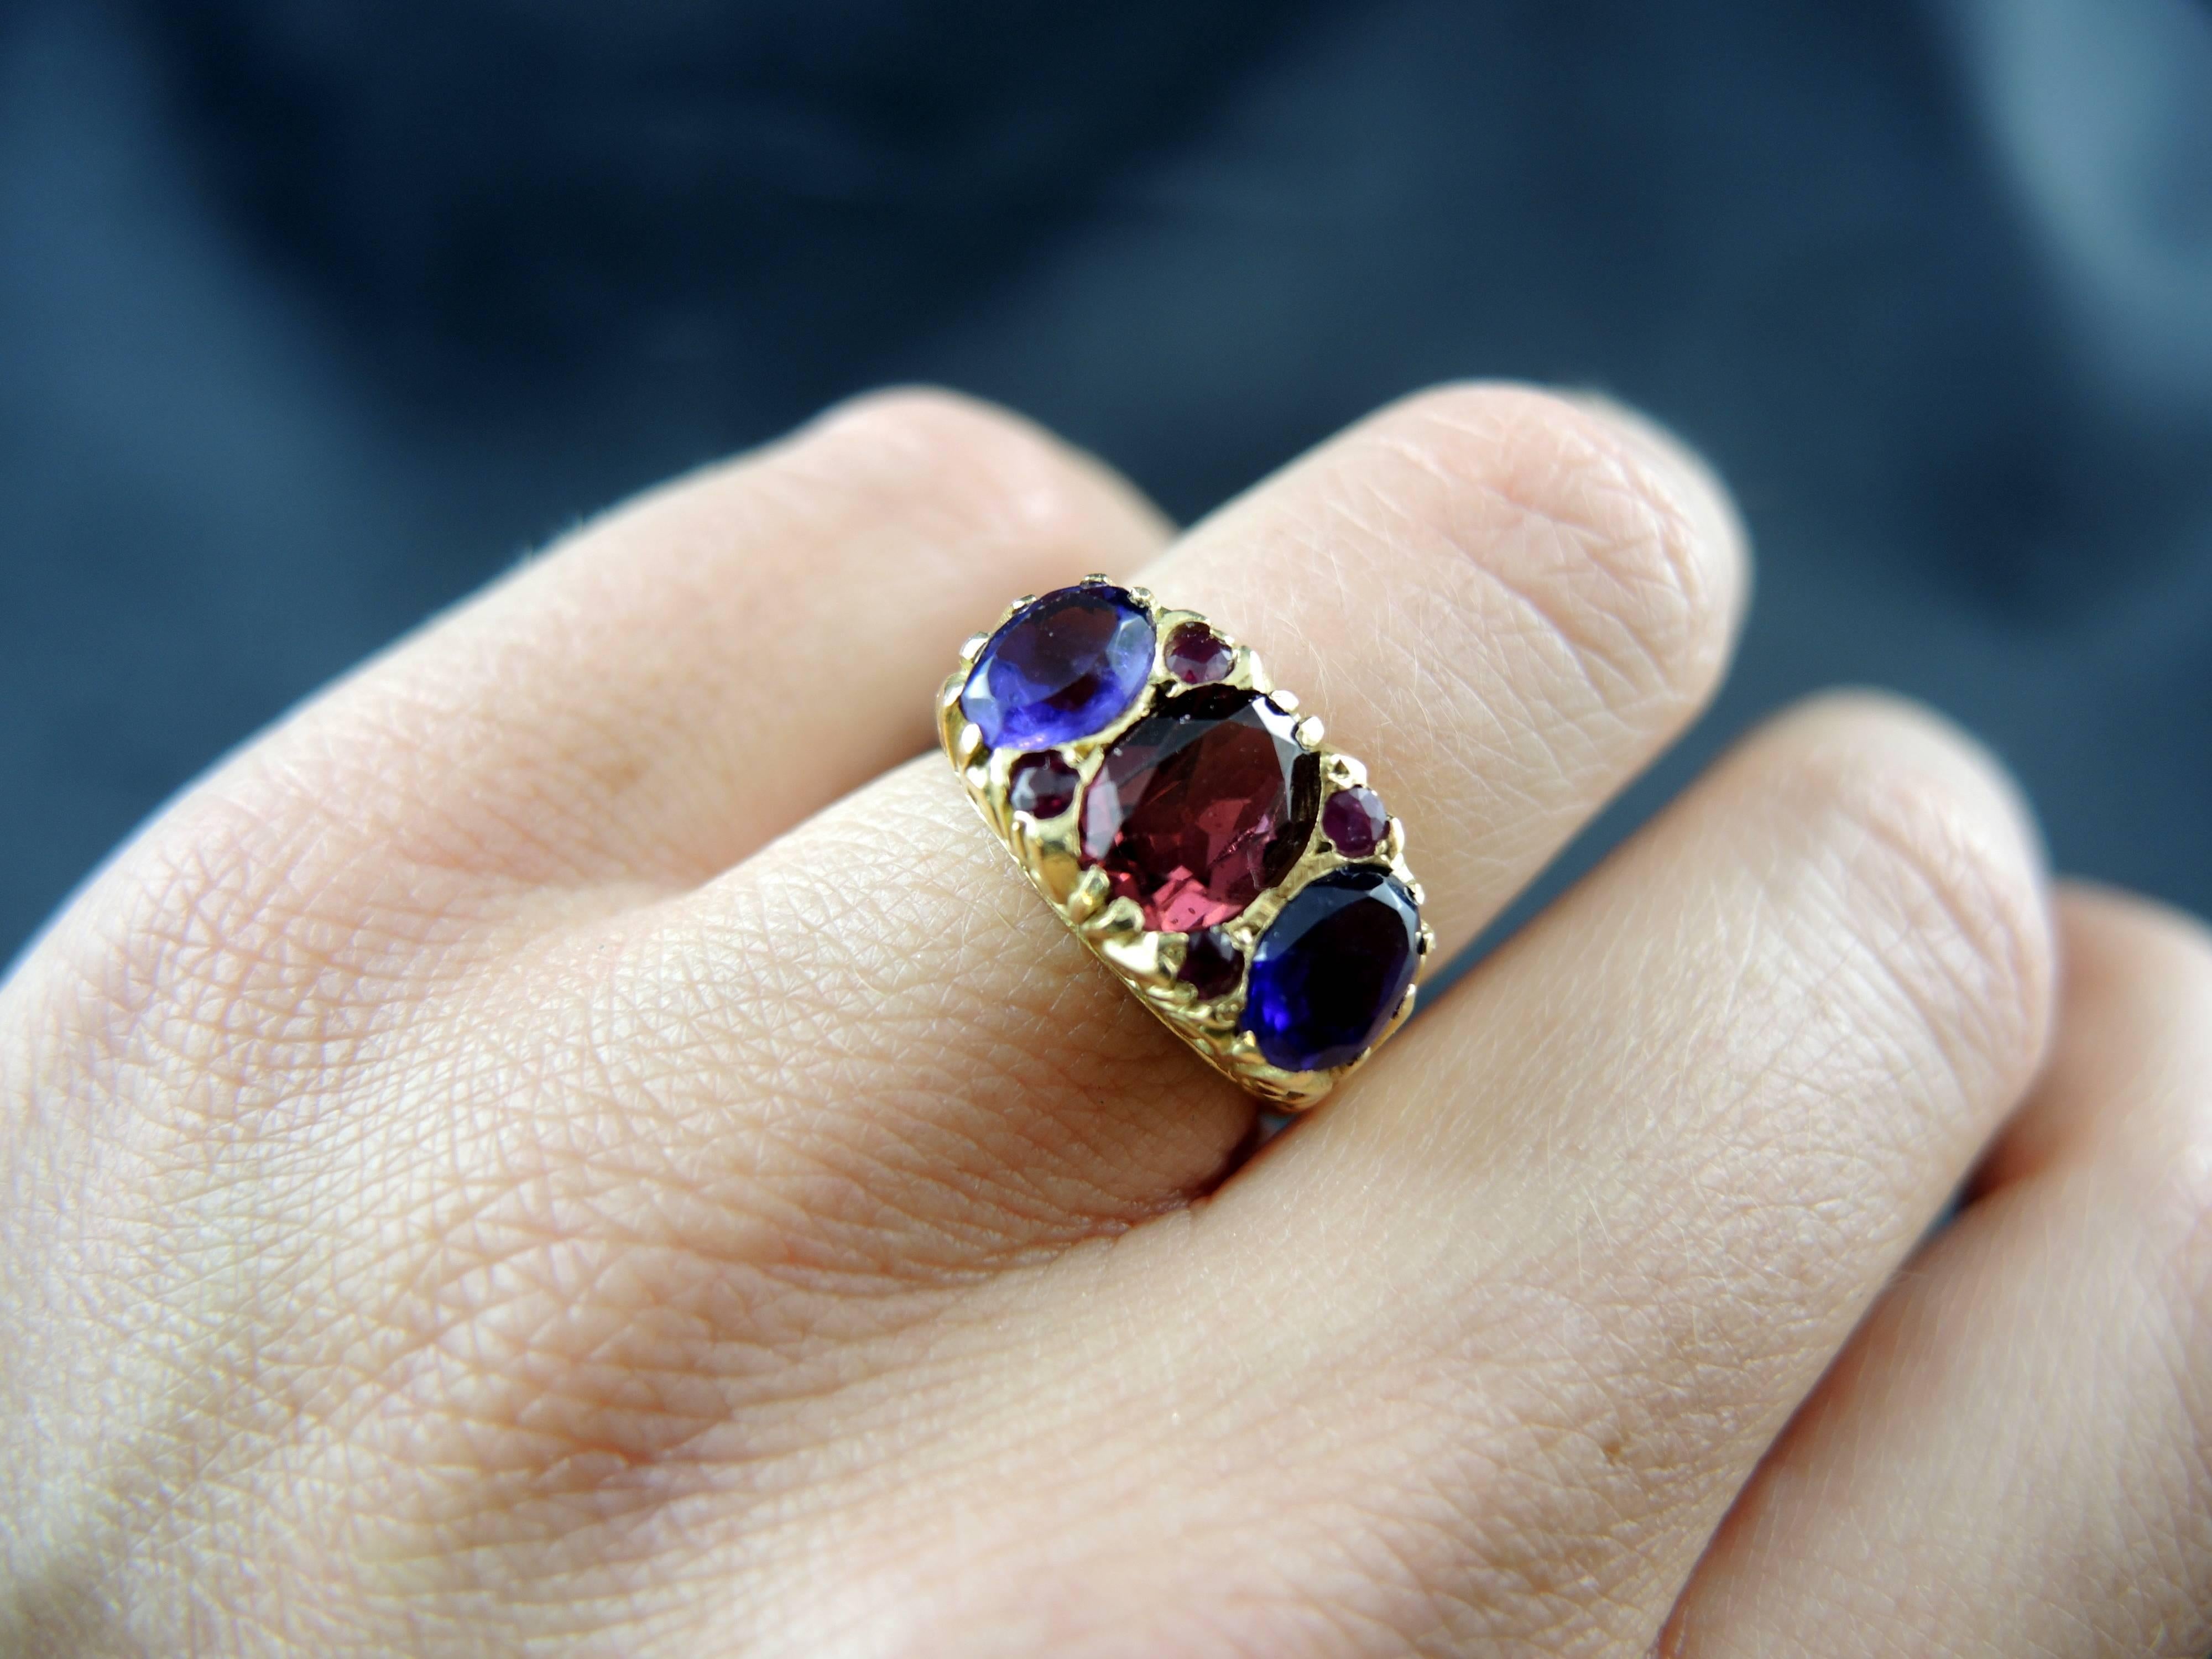 Antique French Three-Stone Ring with Garnet Amethysts and Ruby, 19th Century 4